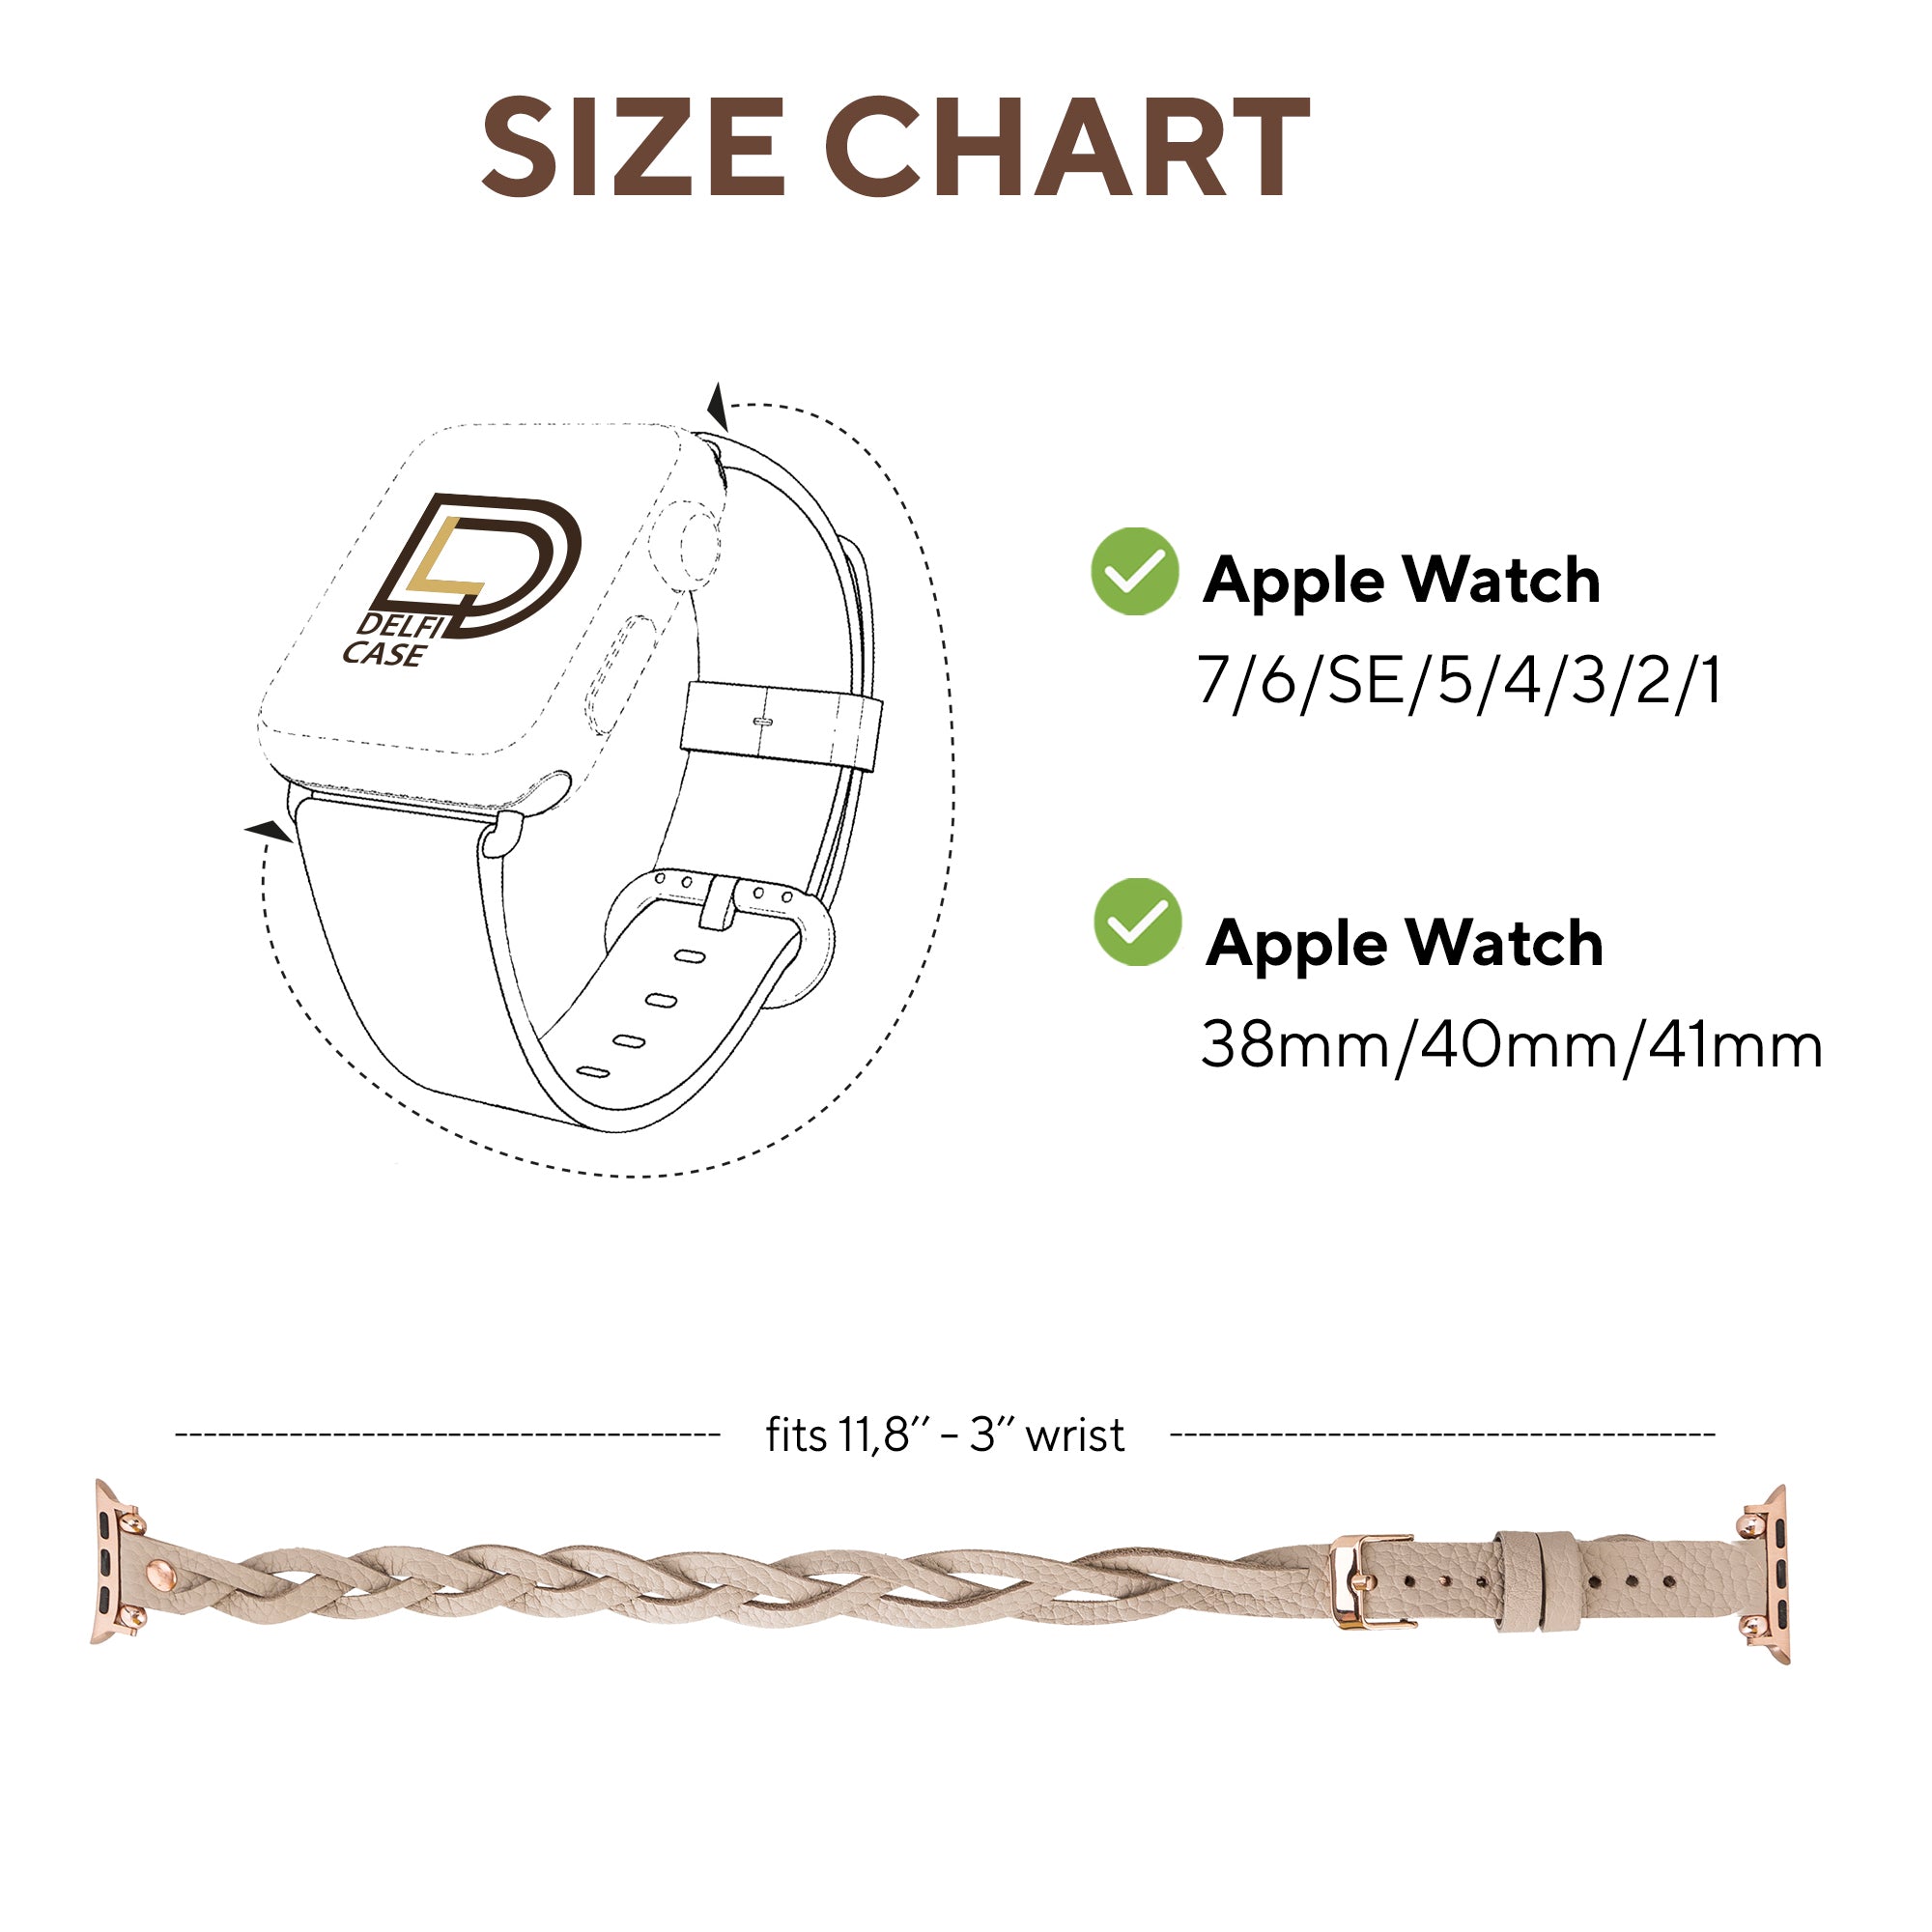 DelfiCase Sheffield Double Tour Watch Band for Apple Watch & Fitbit/Sense 24